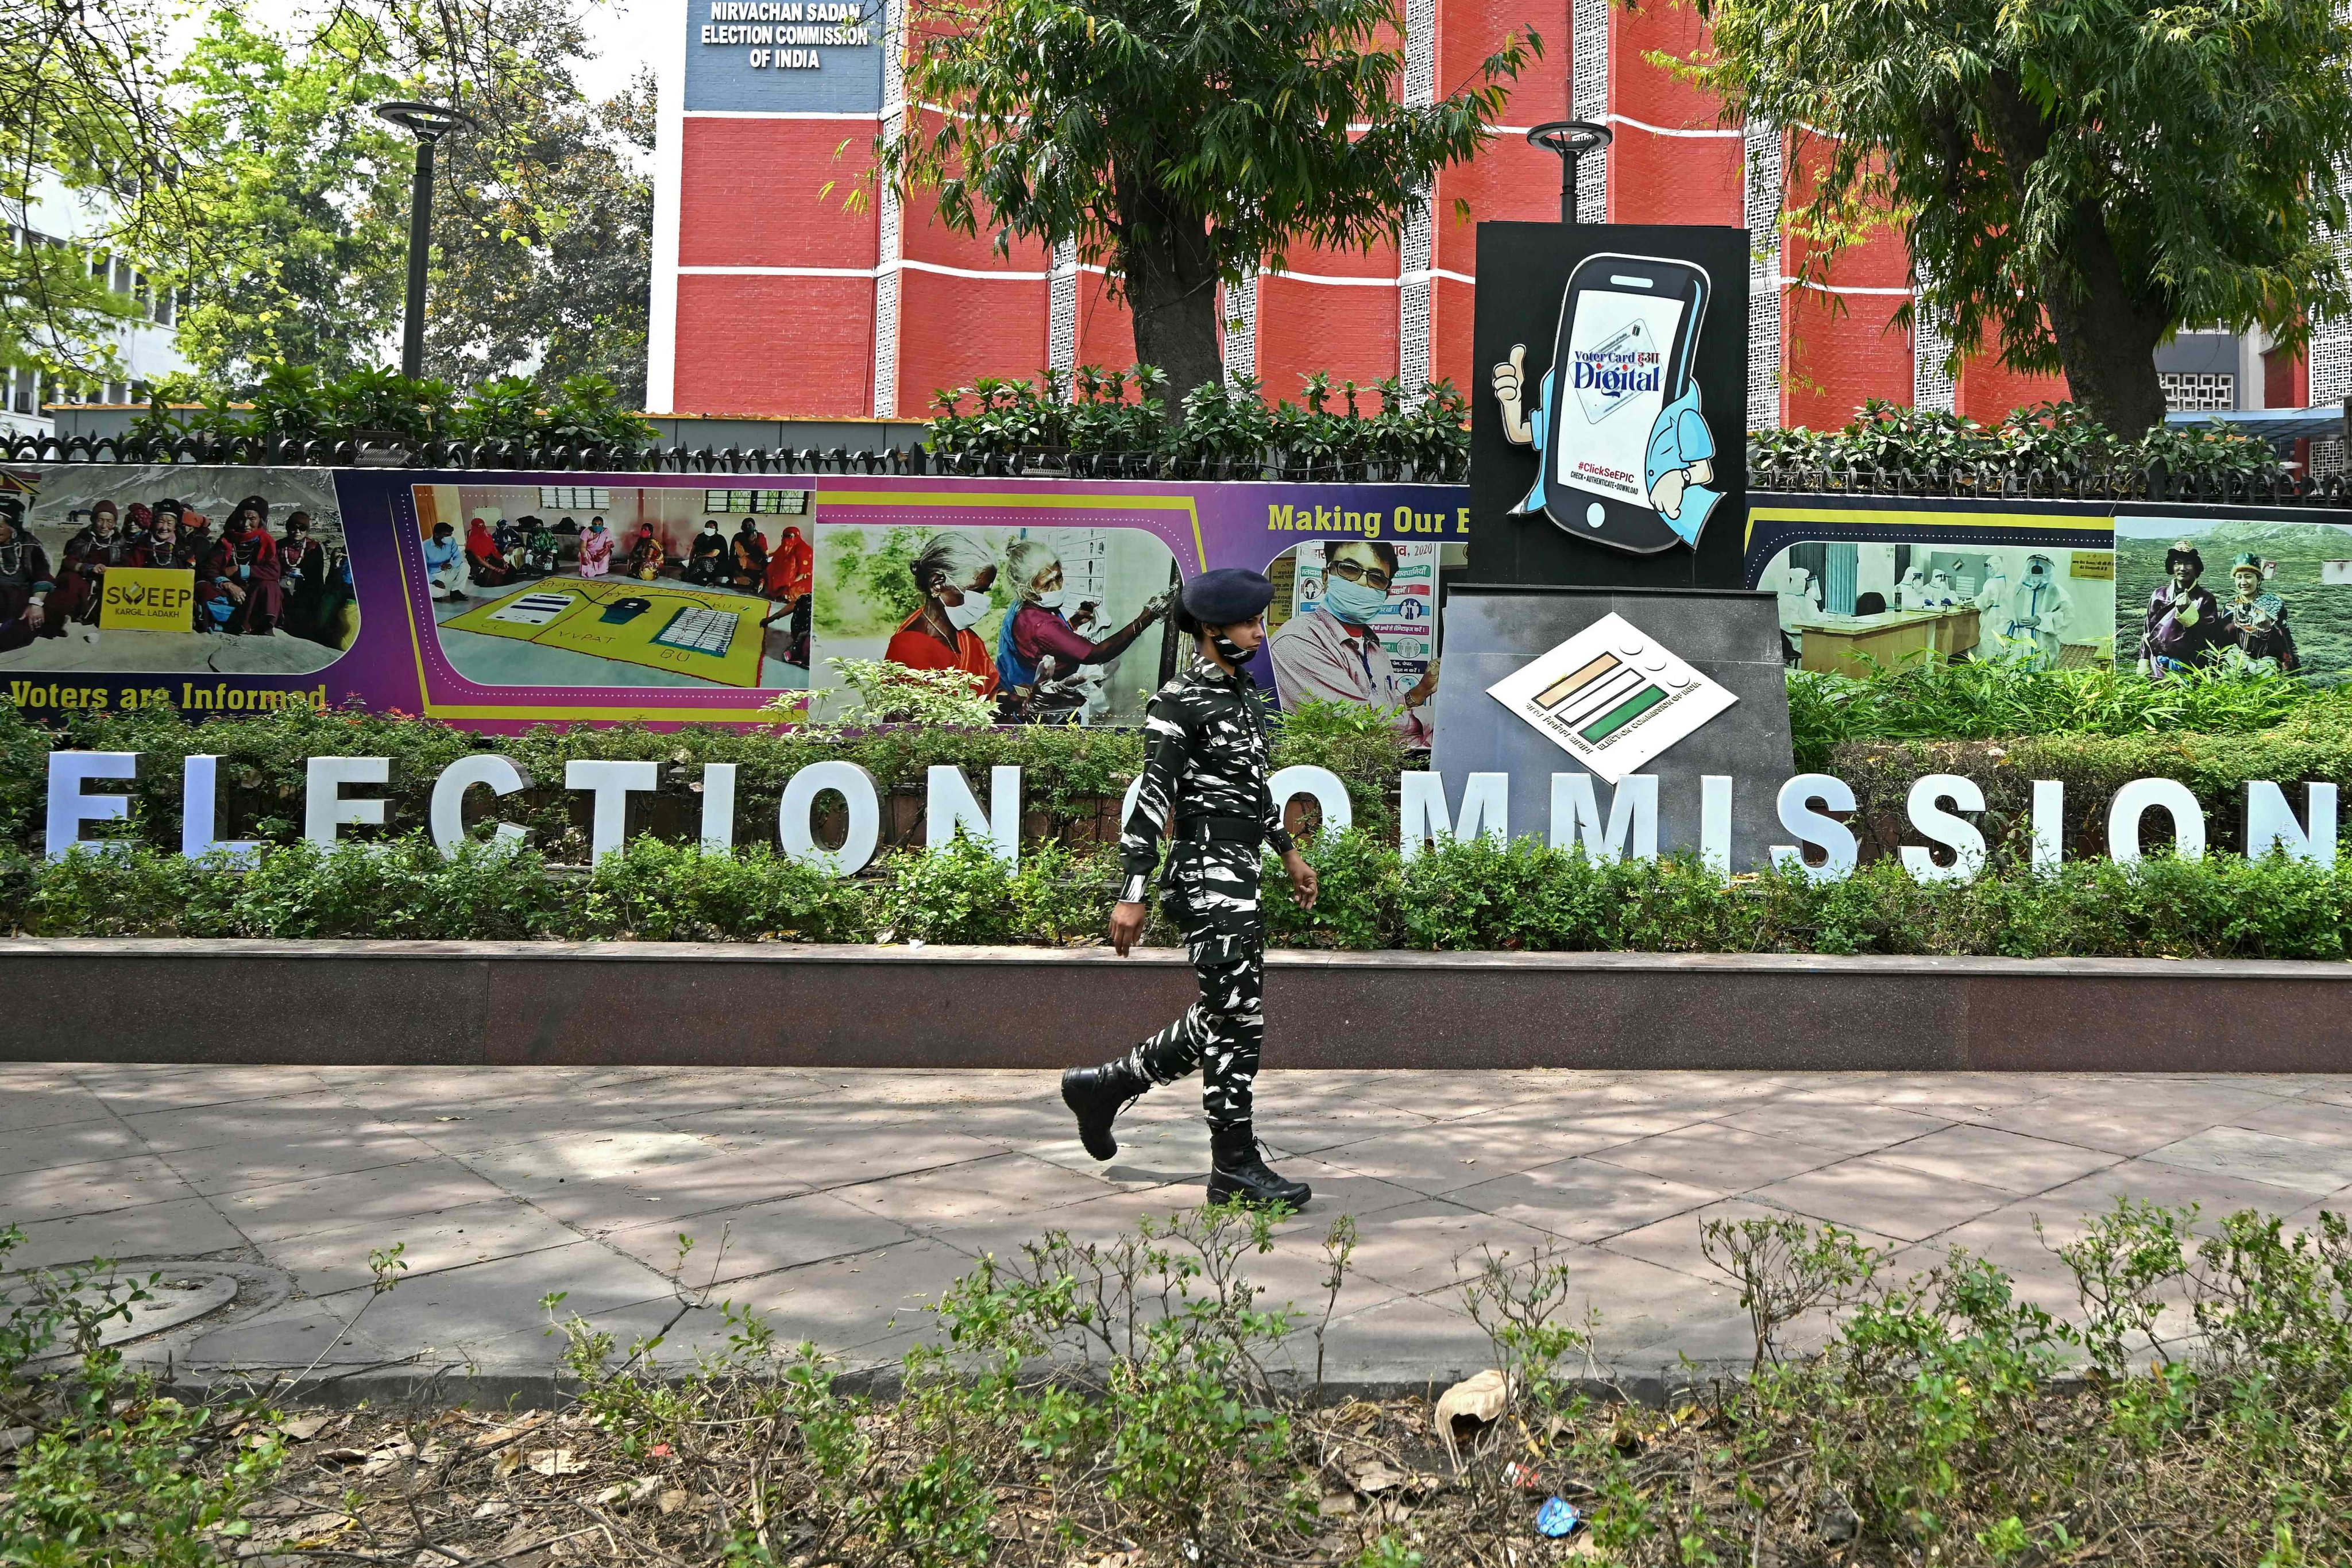 A security personnel walks past the office of the election commission of India. The commission is facing accusations from political parties and civil groups for showing bias towards the ruling Bharatiya Janata Party. Photo: AFP